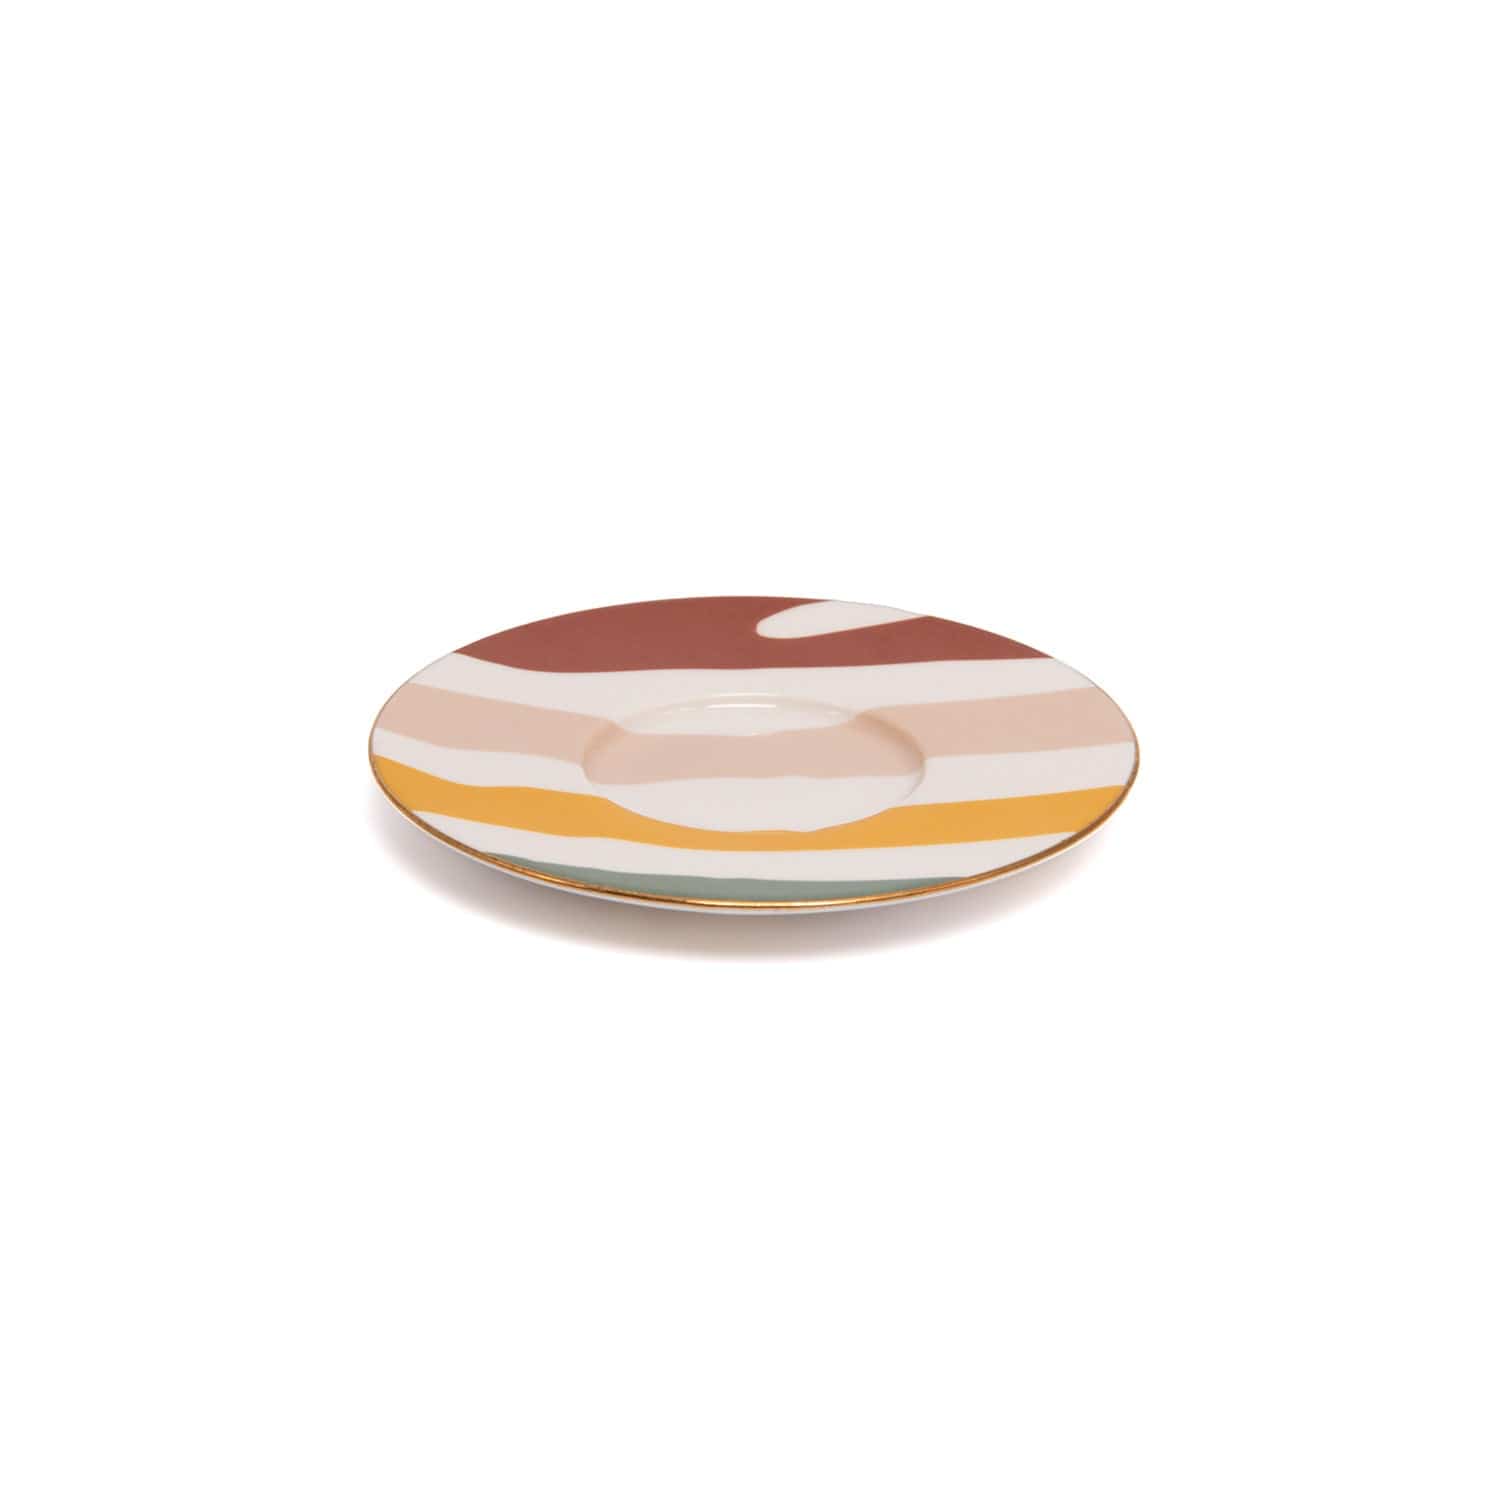 Porland PorselenABSTRACT SAUCER FOR COFFEE CUP